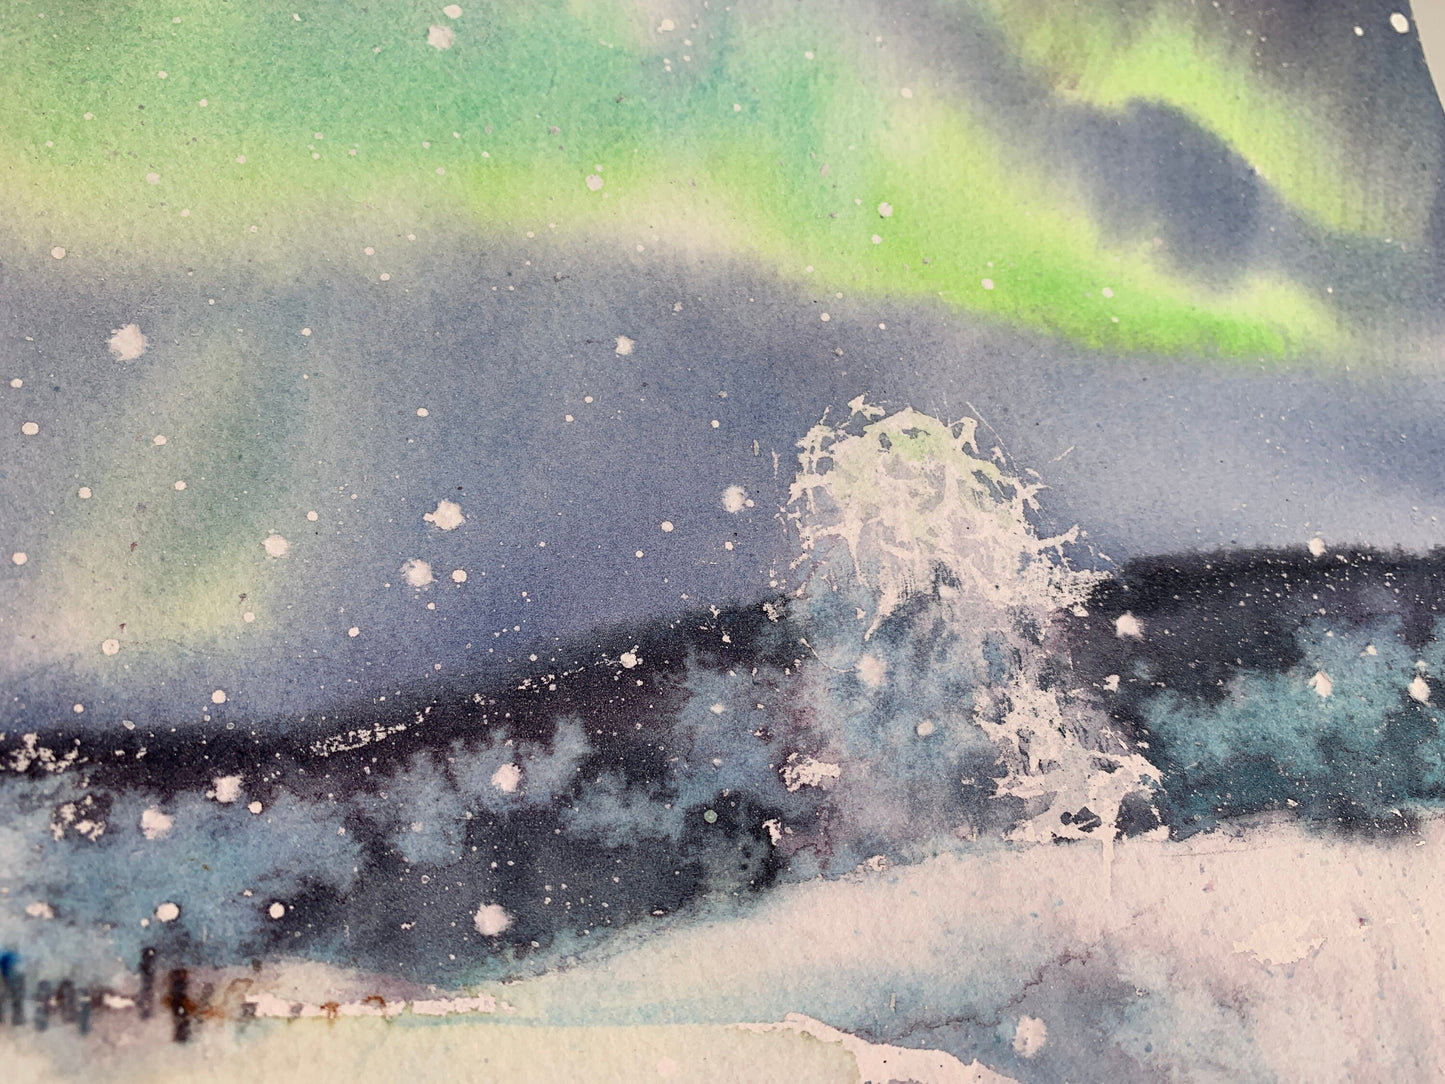 Aurora Borealis Painting Watercolor Original, Winter Forest, Northern lights, Snowy Landscape, Nordic Wall Art, Christmas Gift, Polar lights